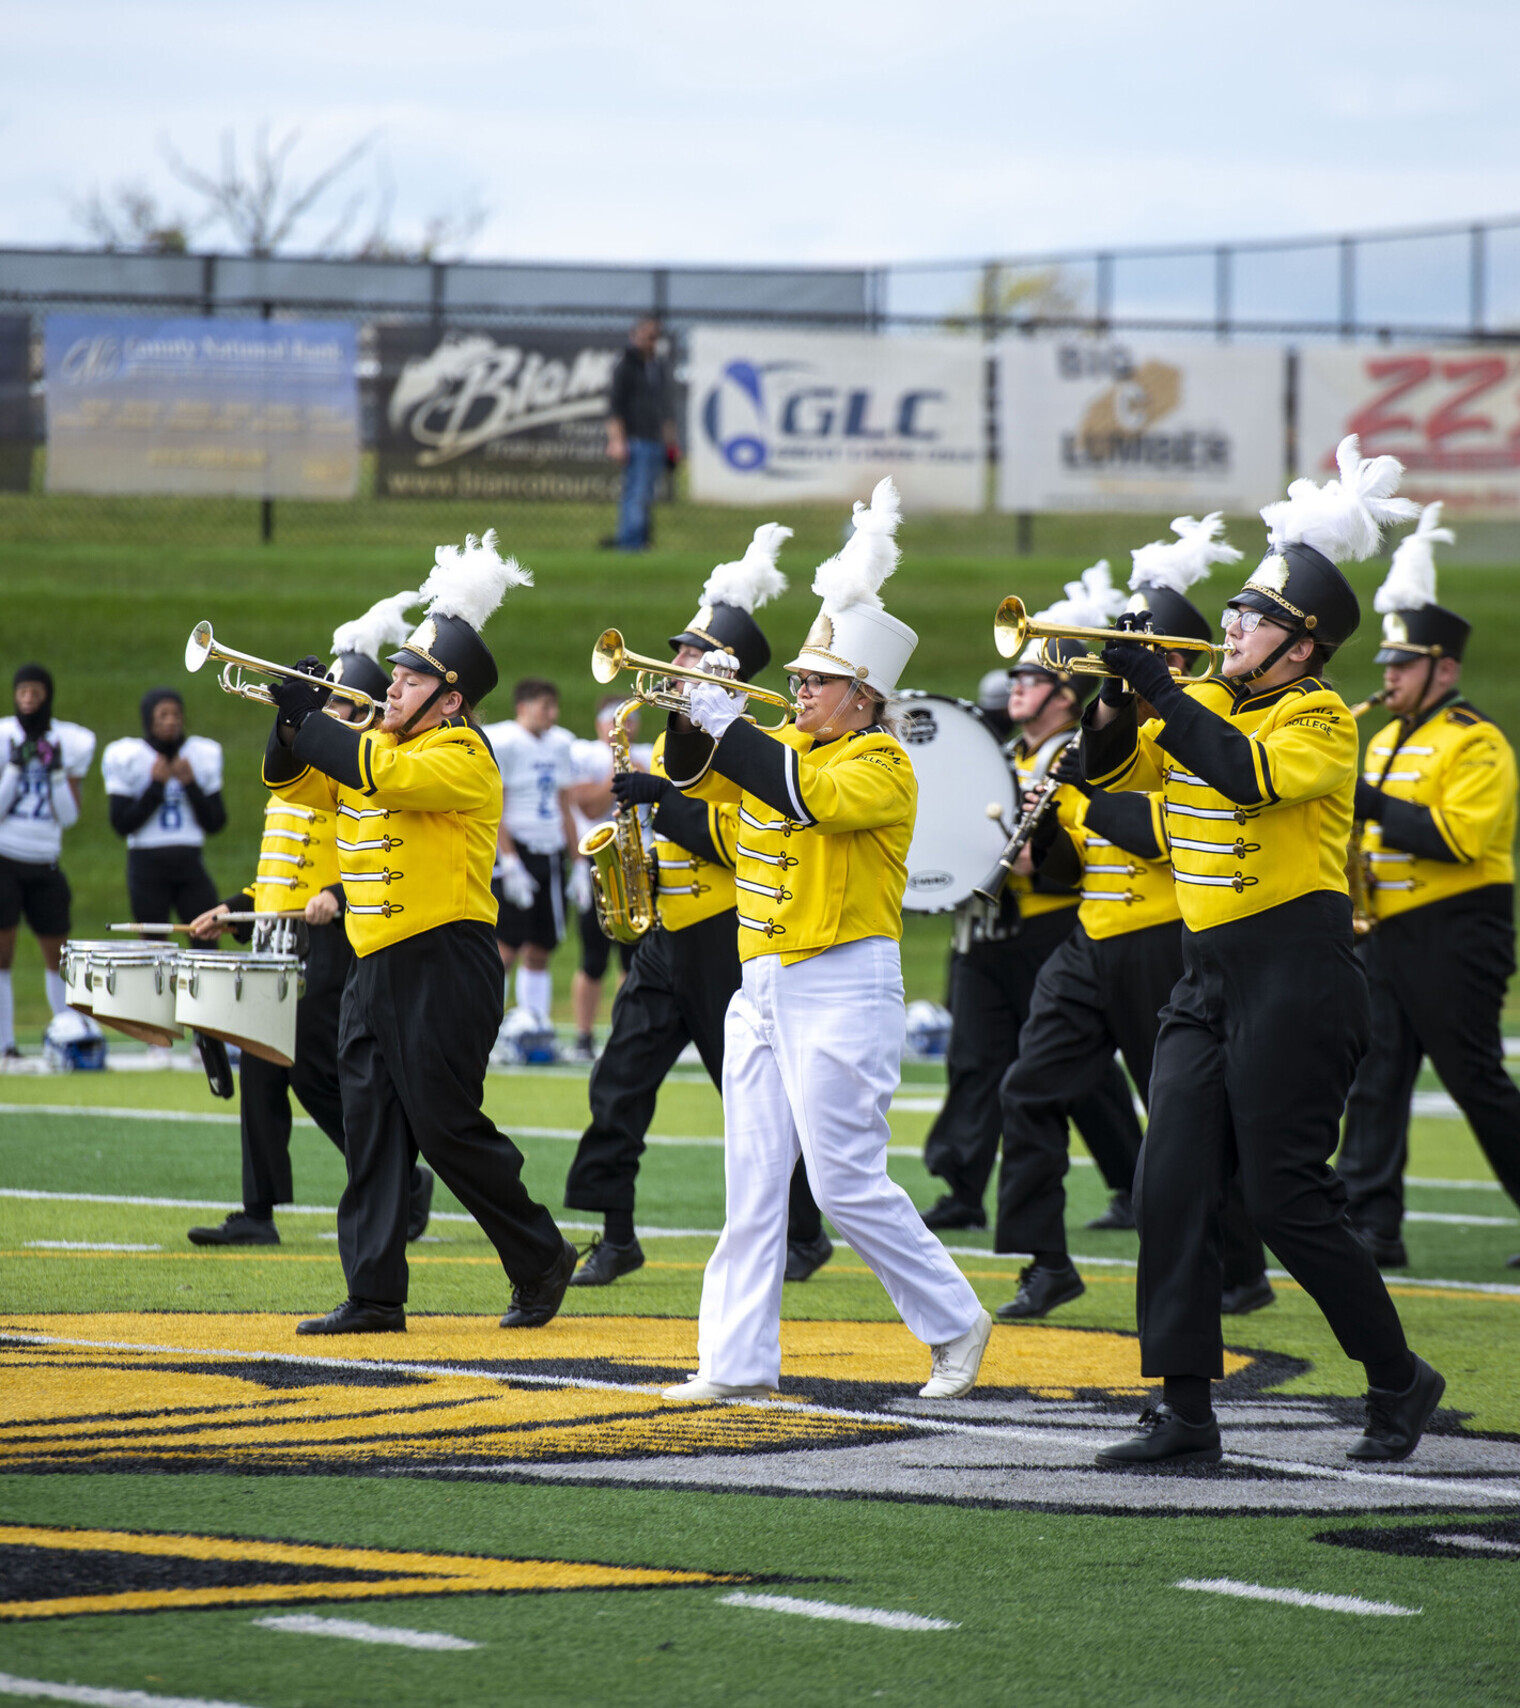 The Importance of Marching Band